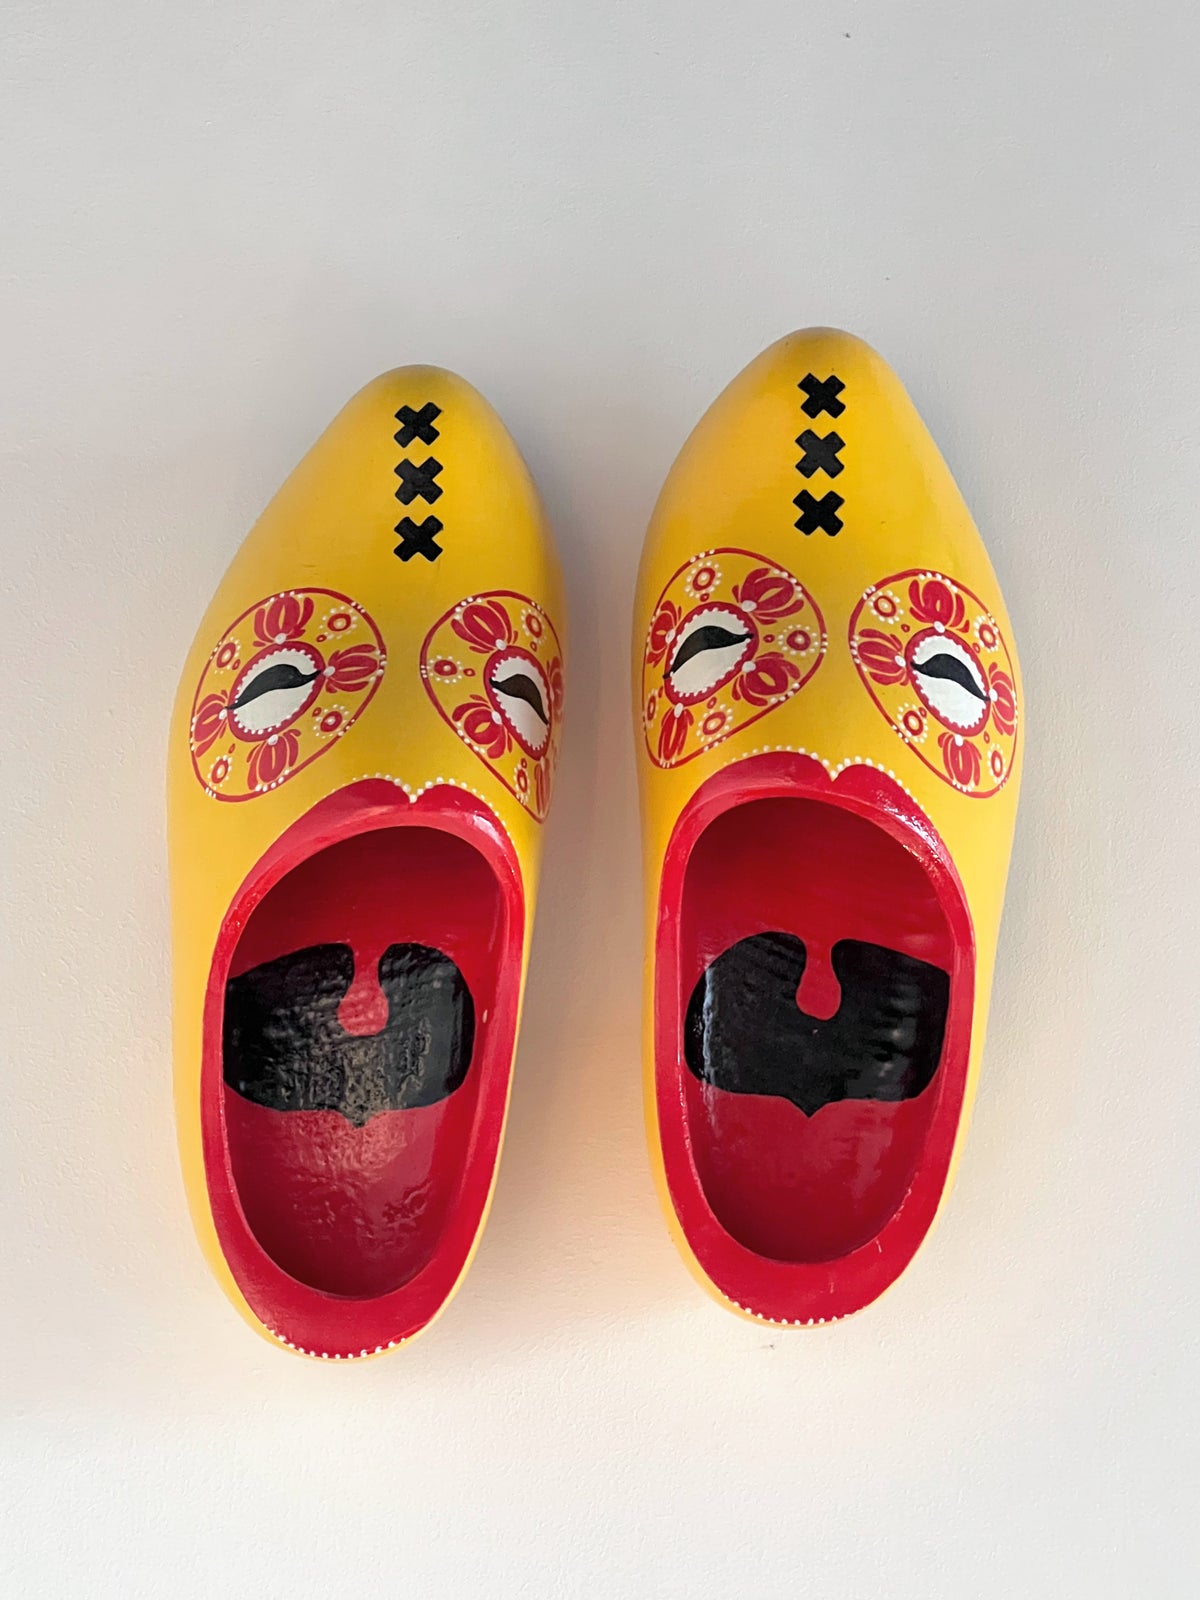 Clogs at Andaz Amsterdam